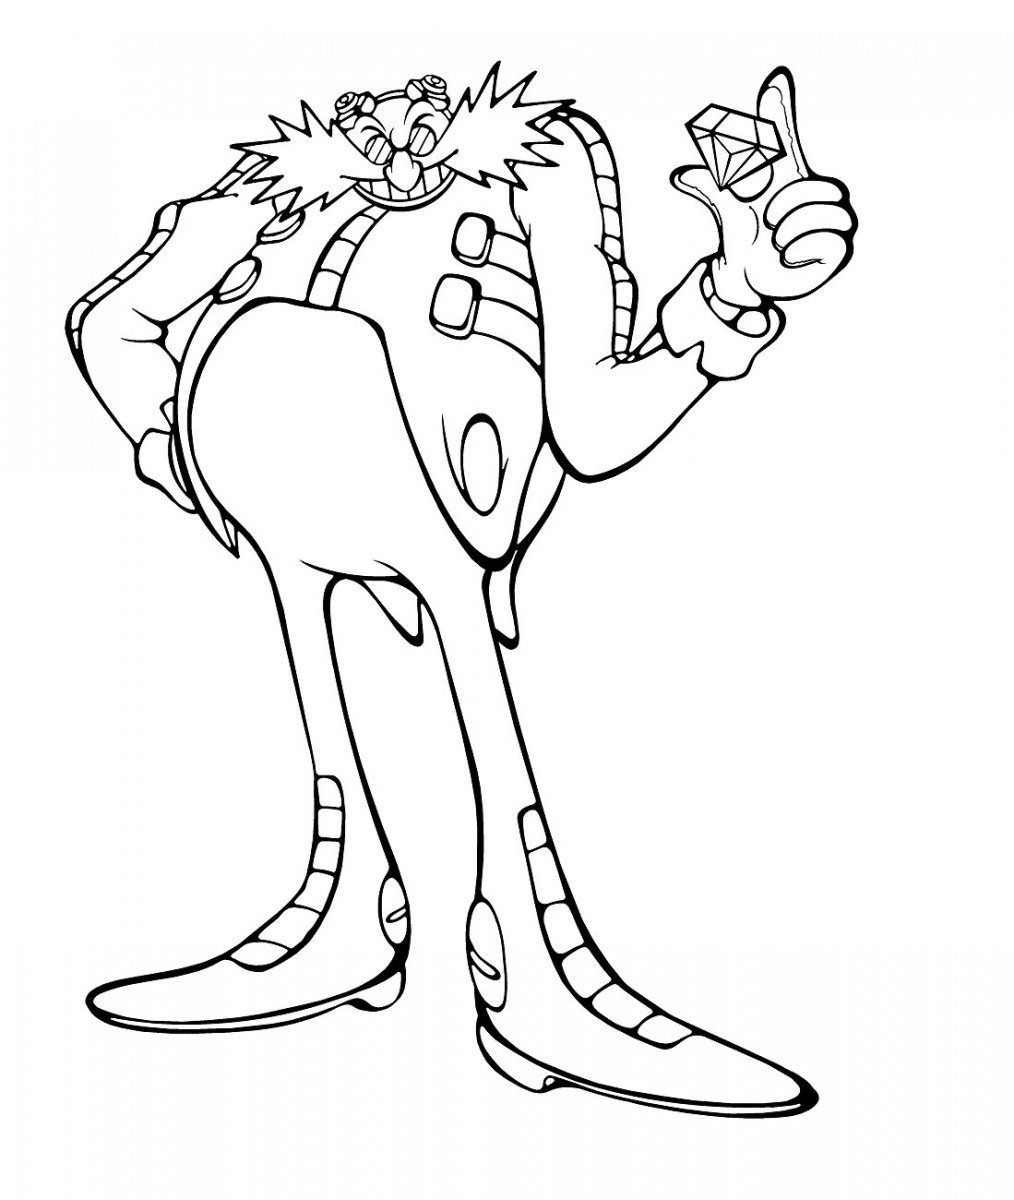 Dr. Eggman Coloring Page